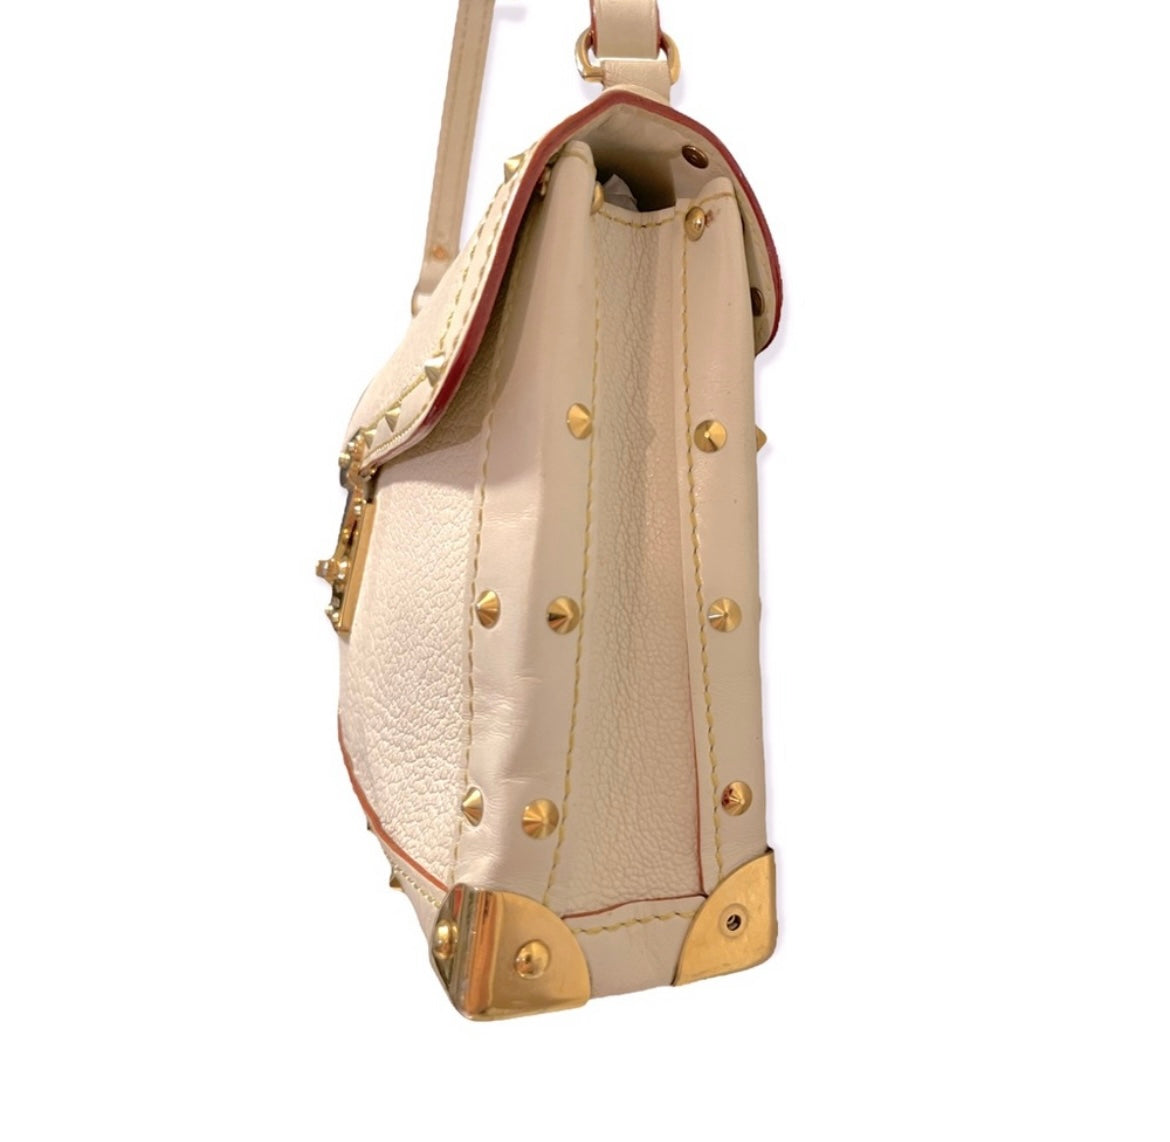 LOUIS VUITTON Suhali L'aimable Leather Shoulder Bag Off White